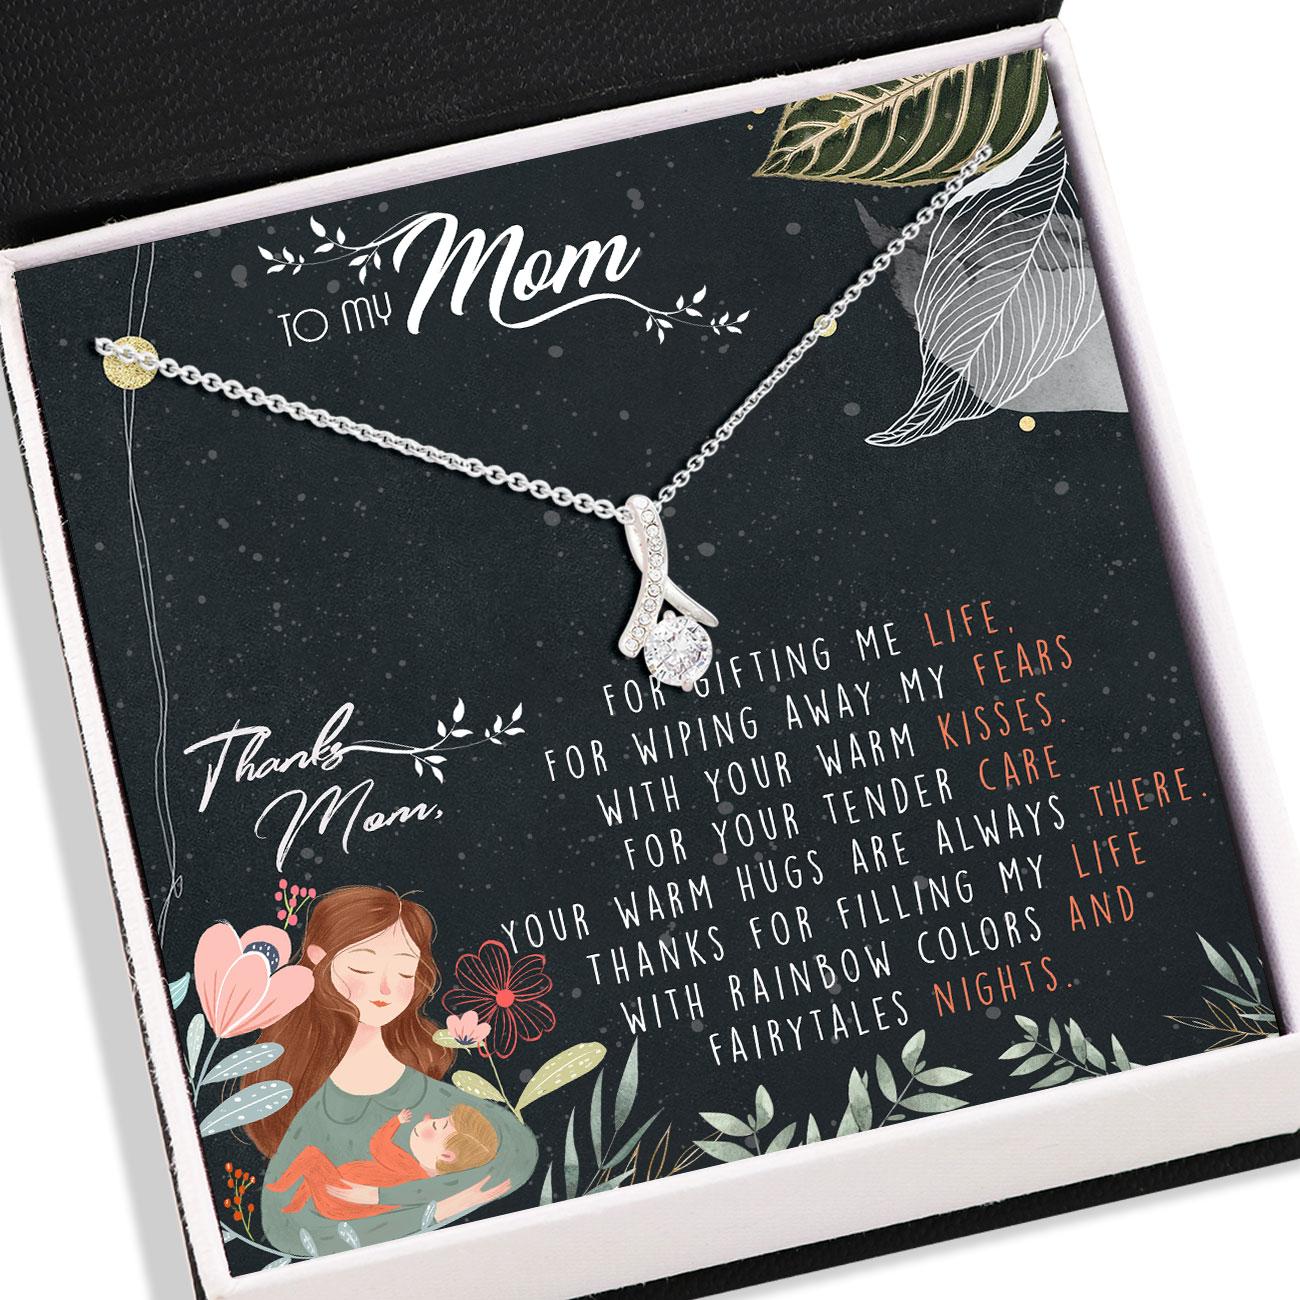 Mom Necklace, To My Mom Necklace Card - Alluring Beauty Necklace - Jewelry For Mom, Mother Gifts